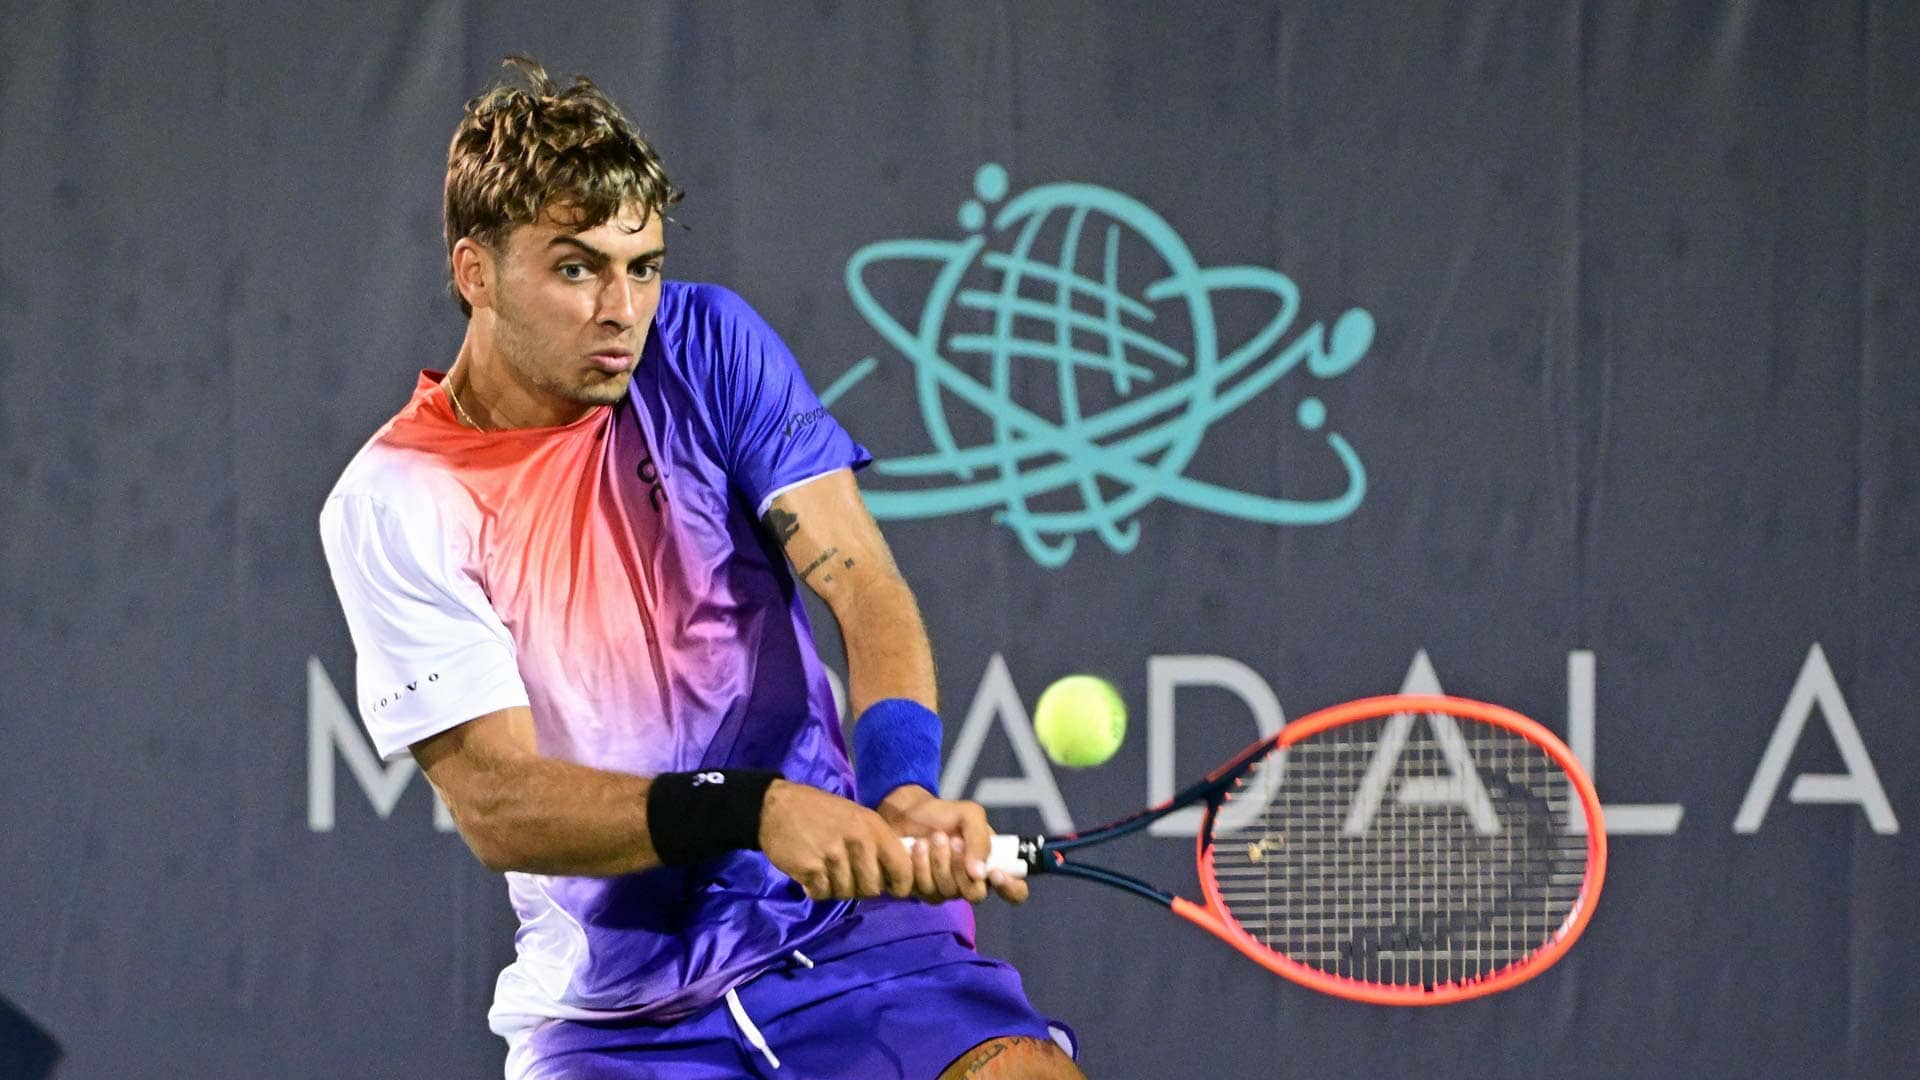 Flavio Cobolli is set to compete in his first ATP Tour final.